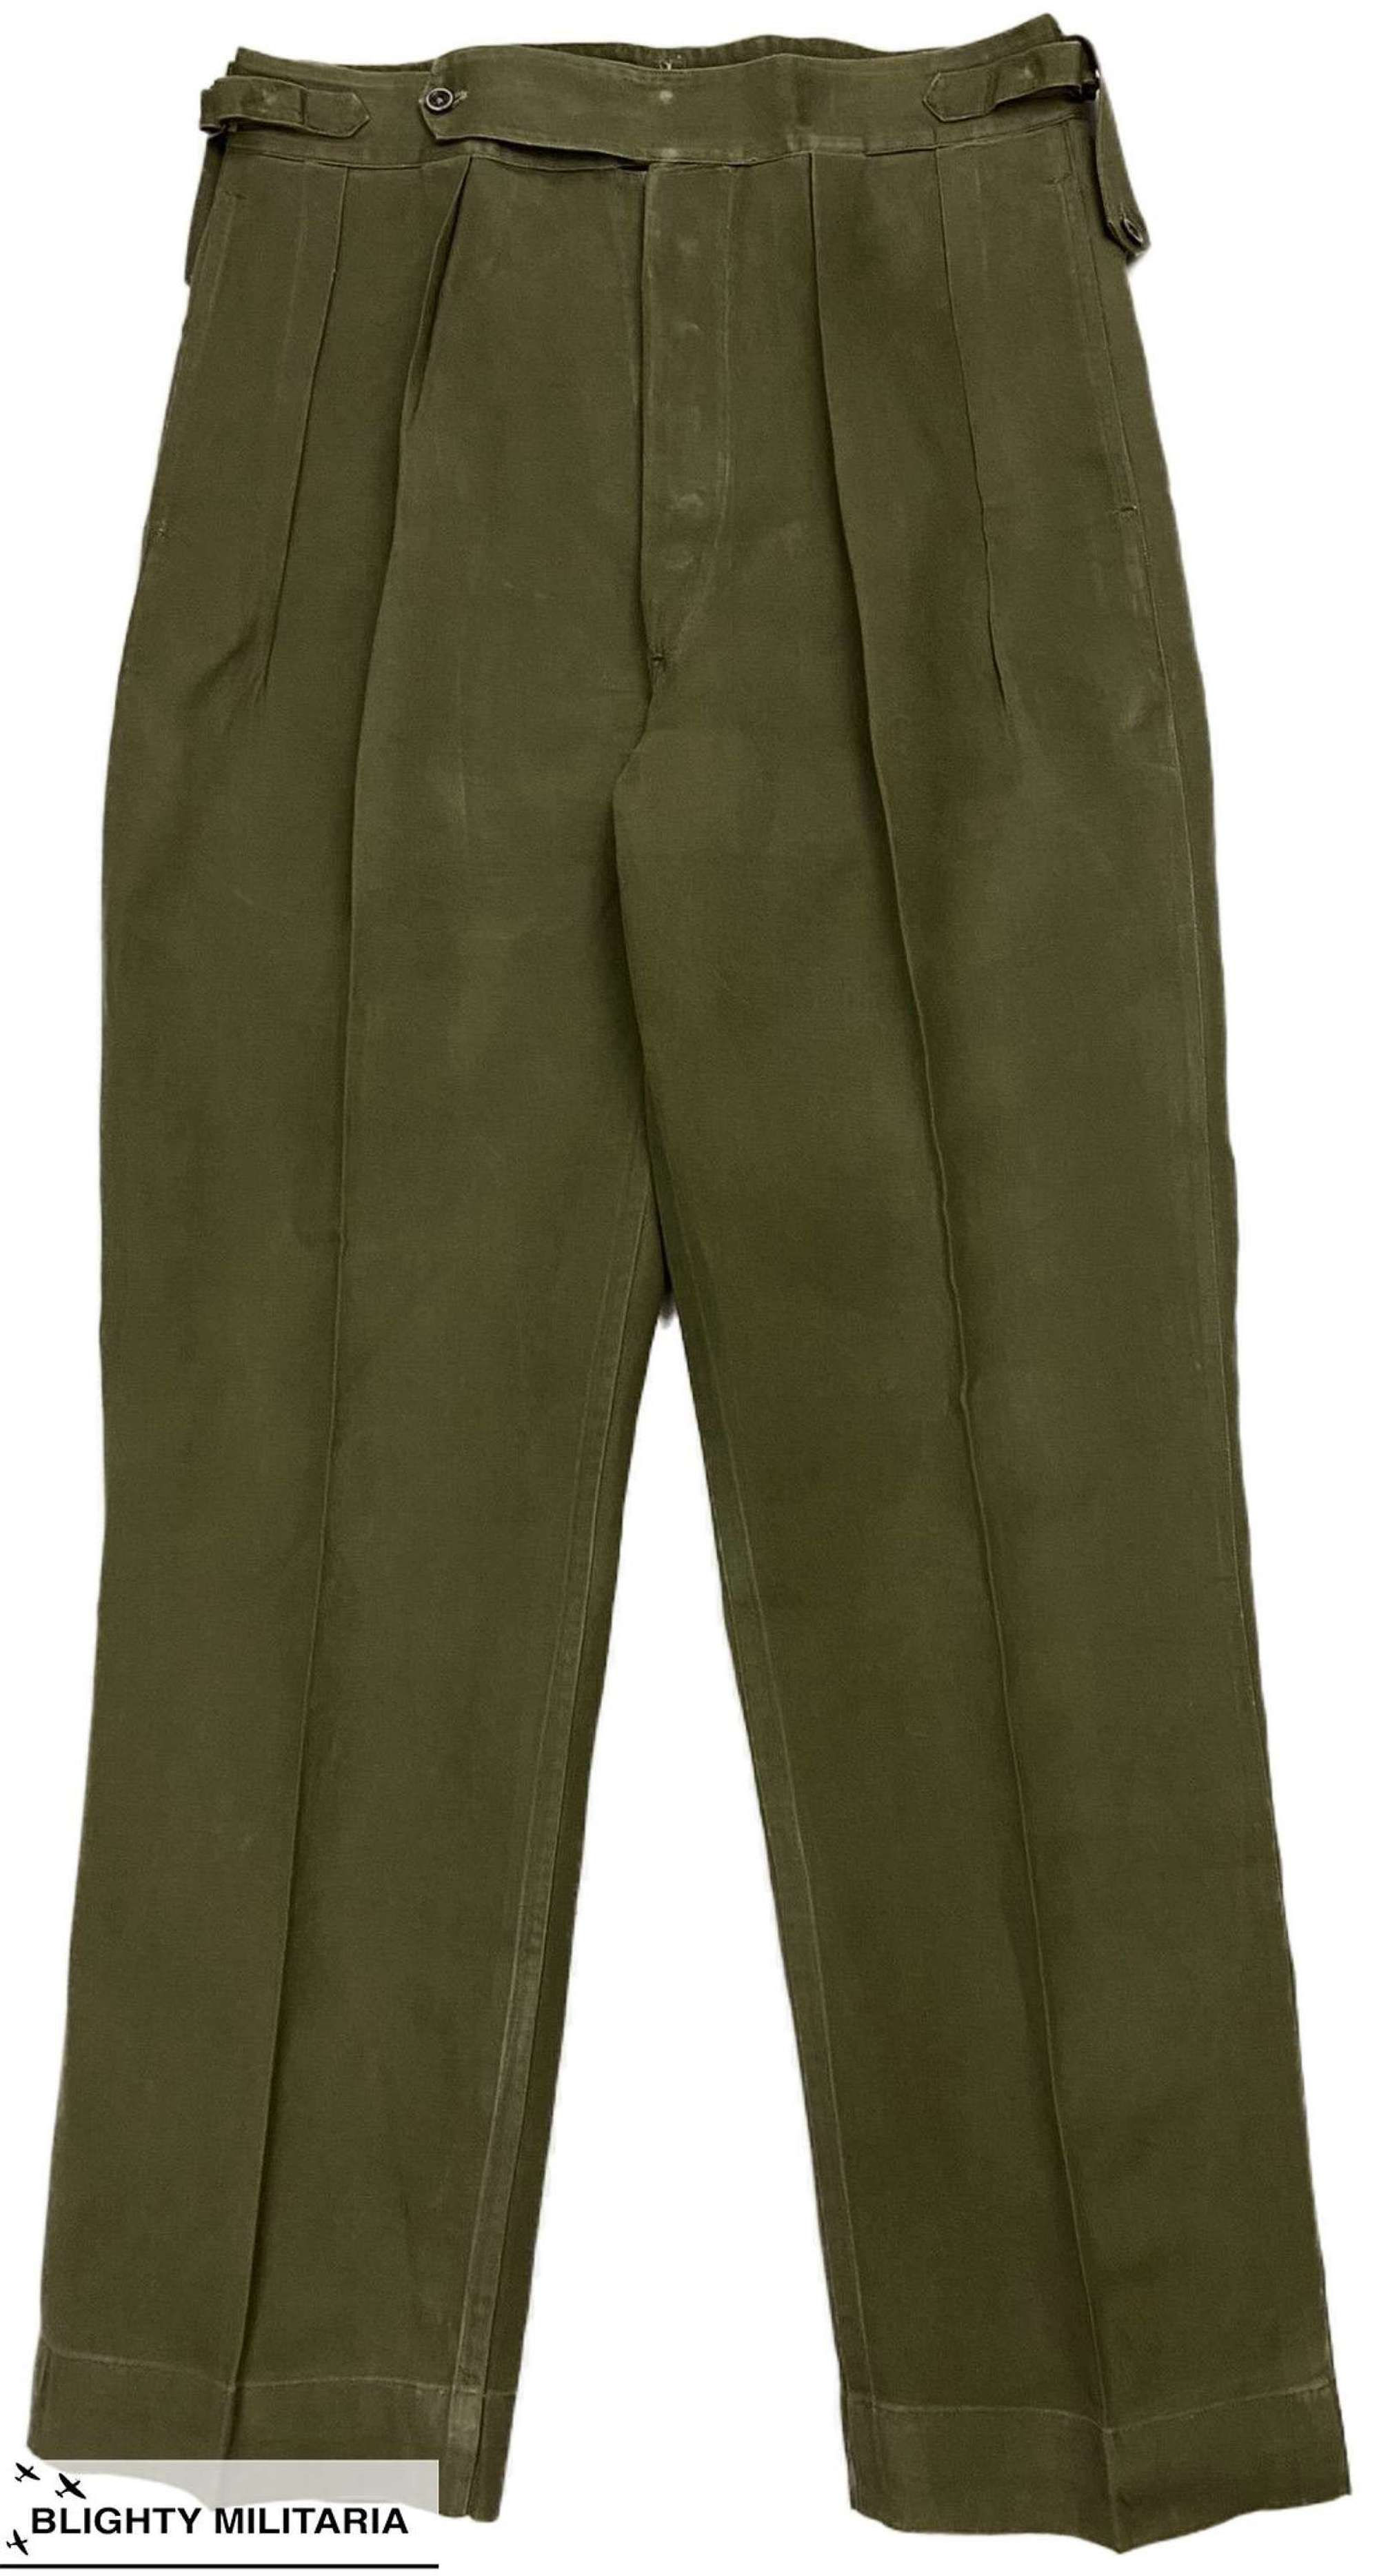 Original 1950s British Officer's Jungle Green Trousers - Size 31x31